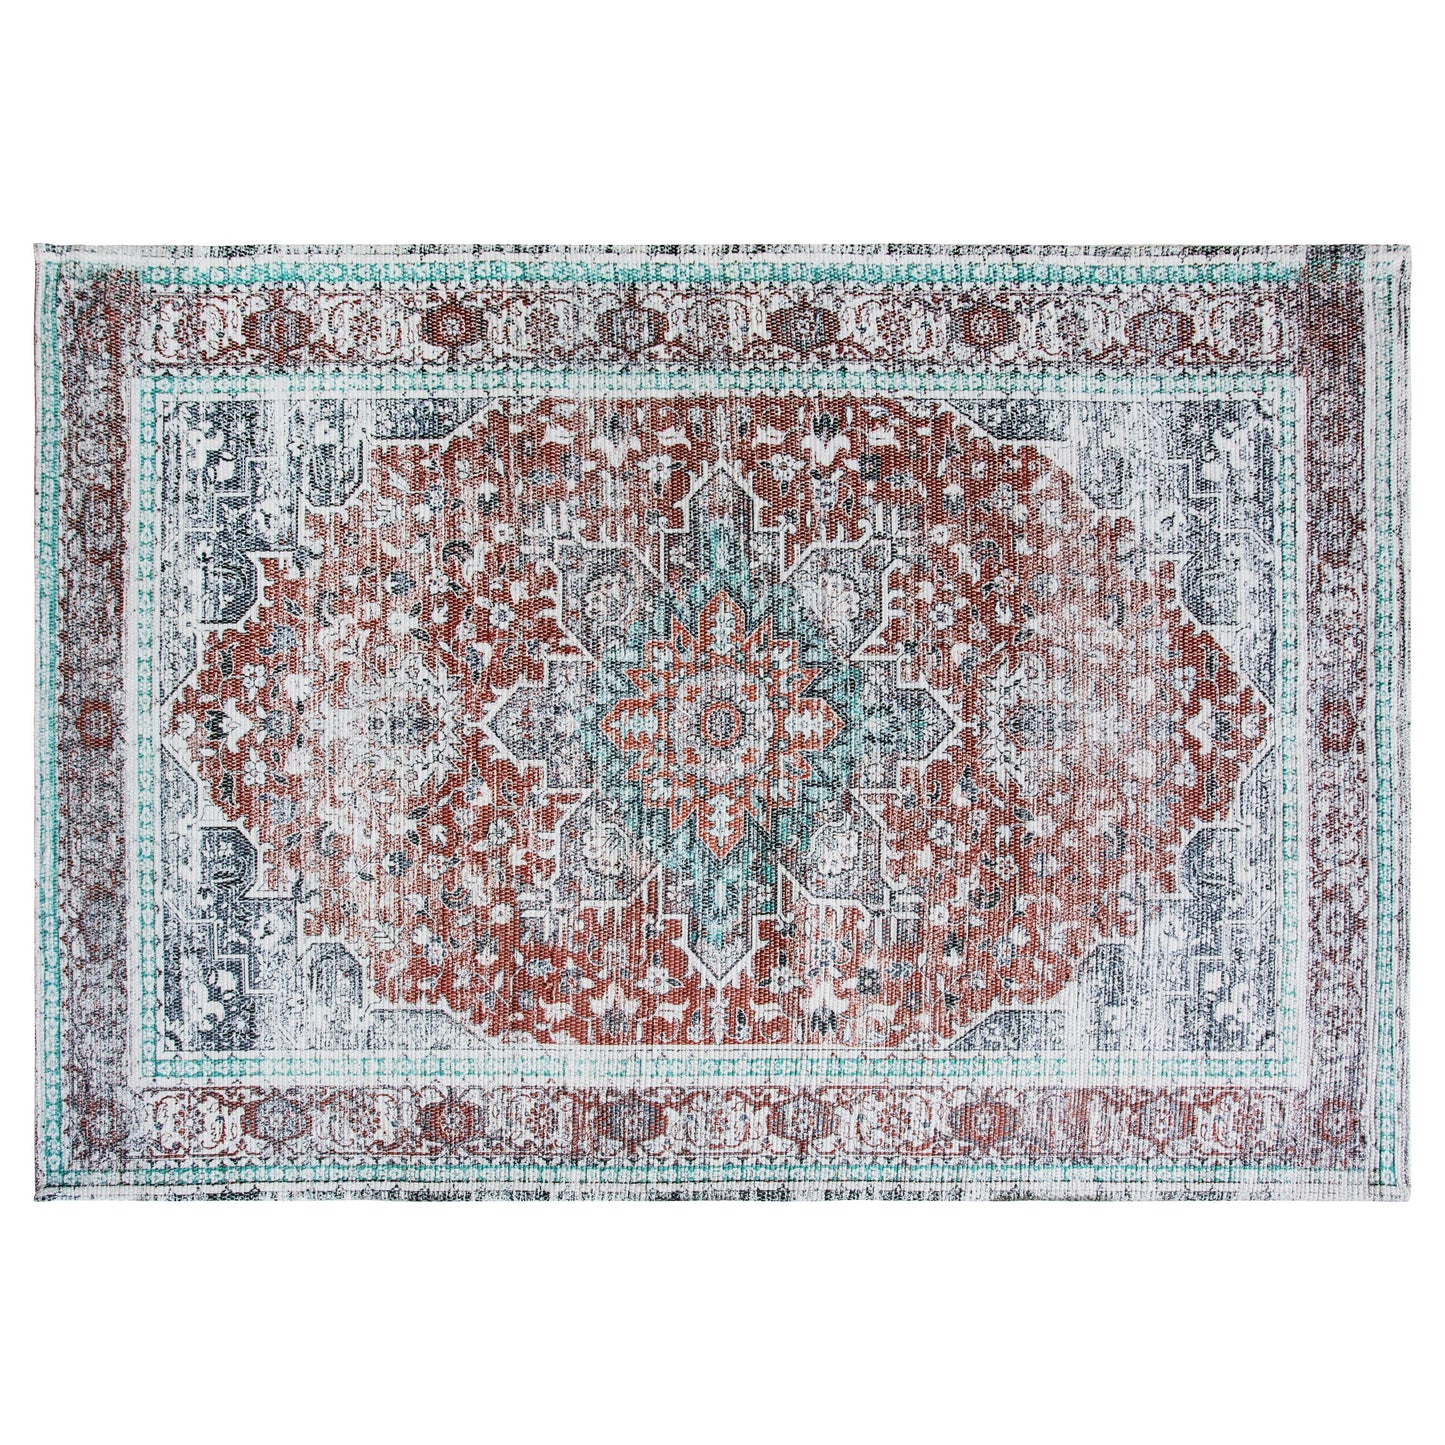 An Allaleigh Rug with an ornate design on a white background, perfect for interior decor.